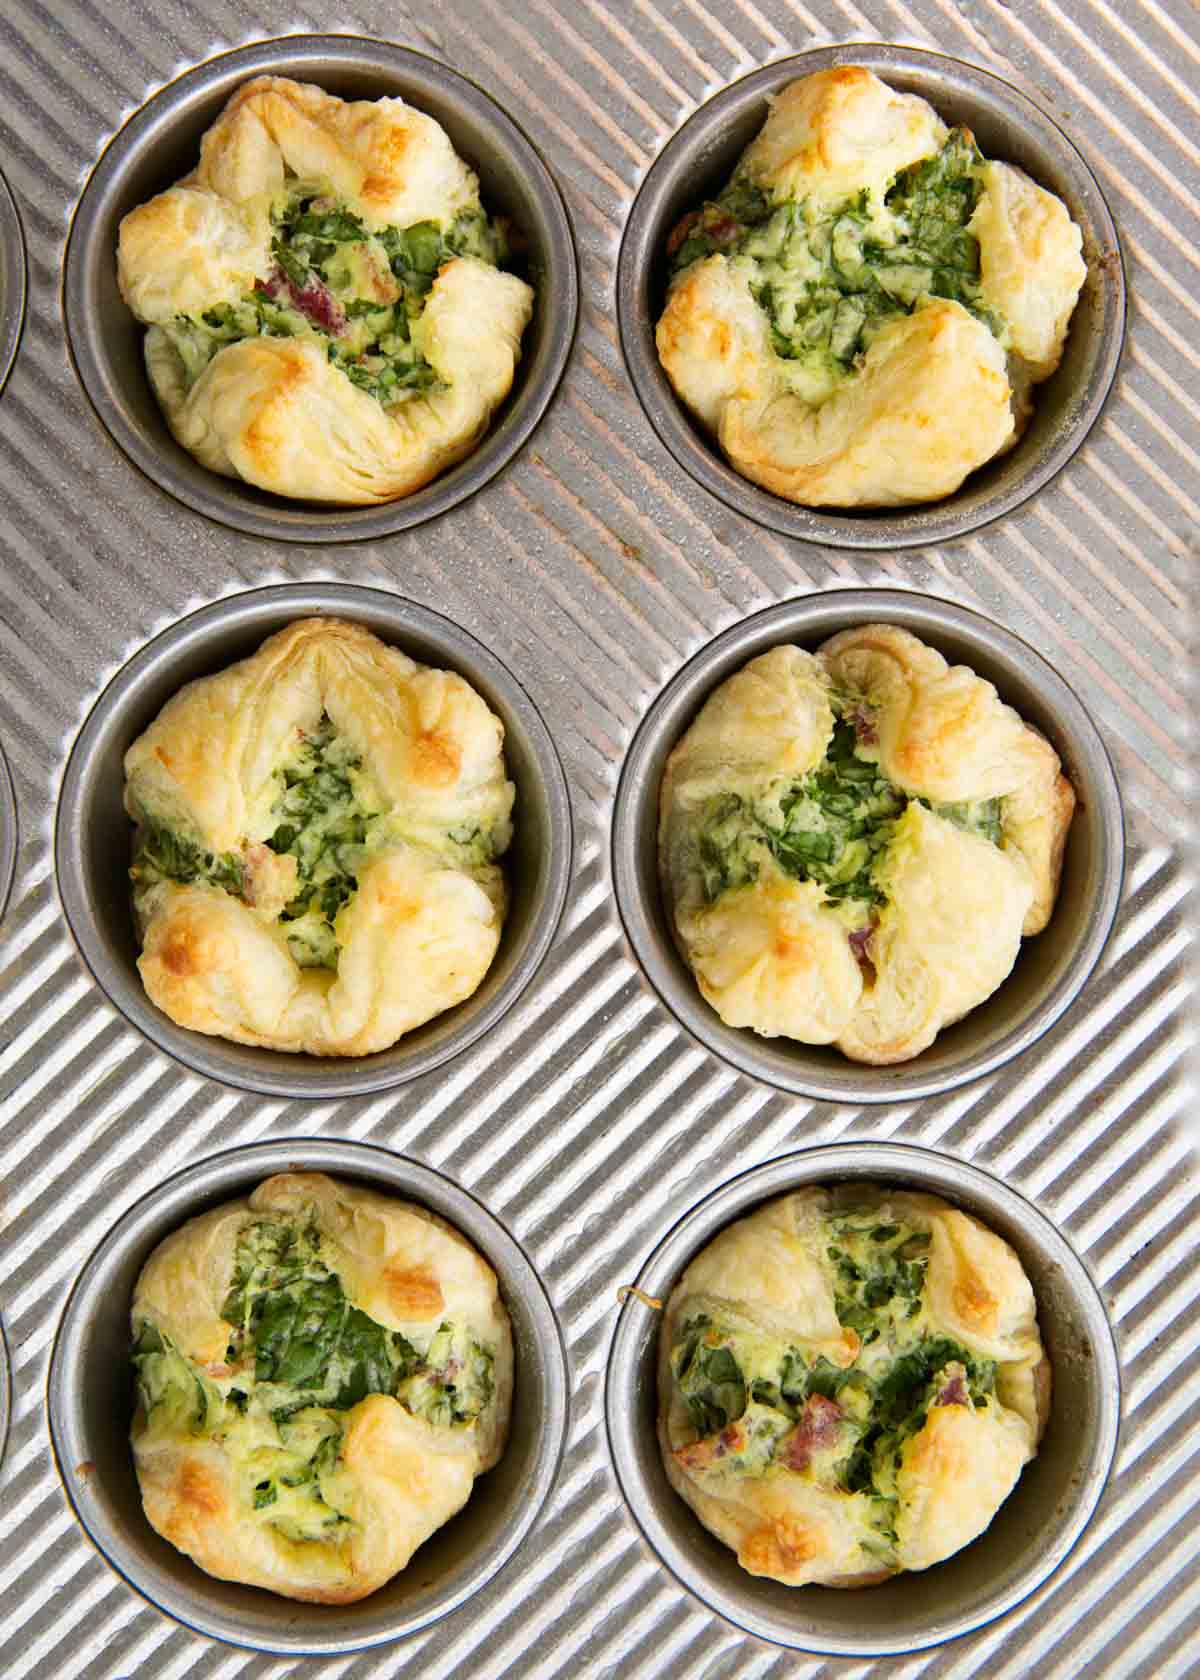 Spinach puffs cooked in a muffin tin.